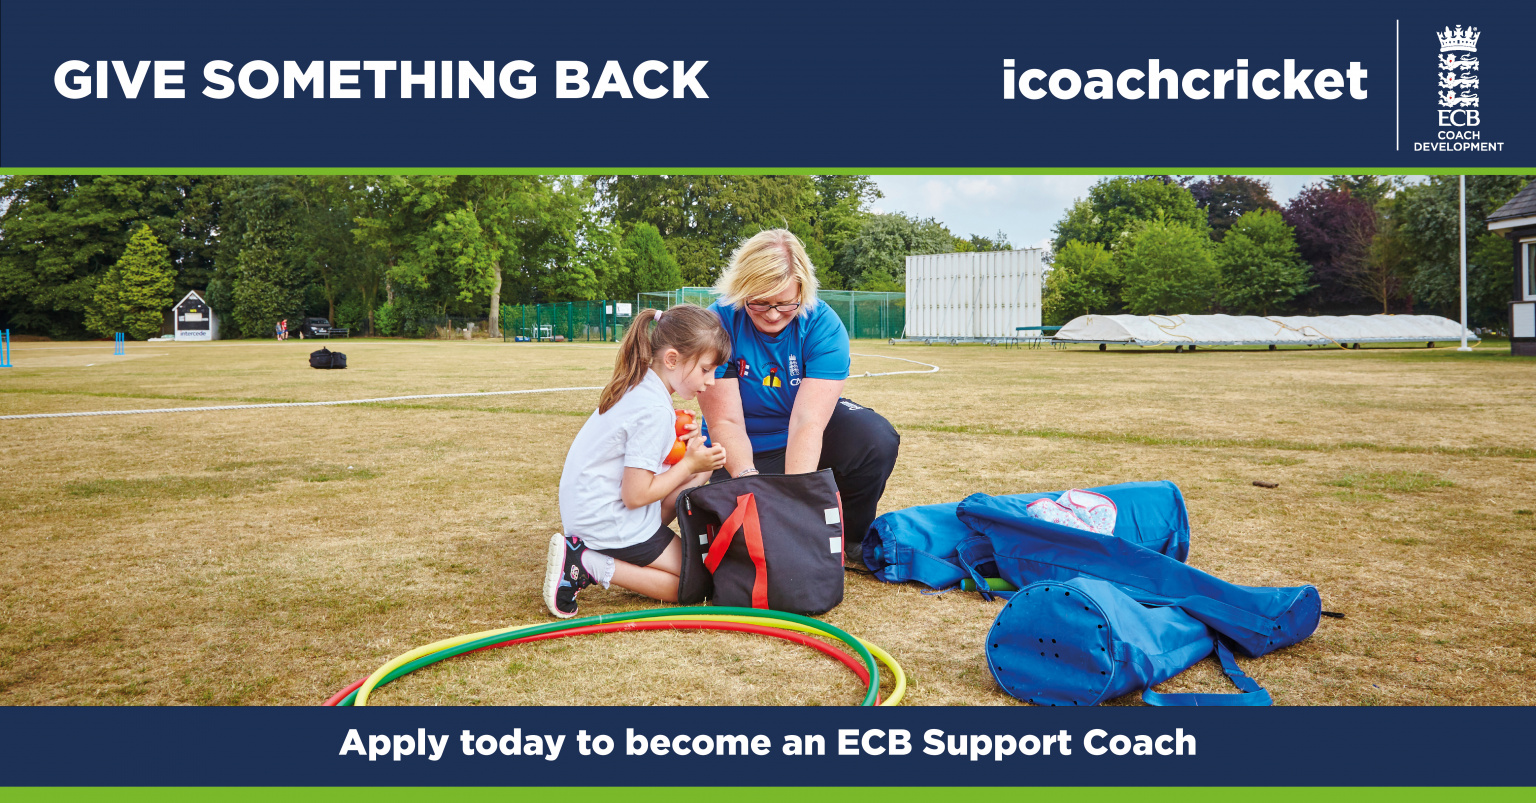 Cricket Support Coach Training for Women and Girls - Dorset Cricket Board